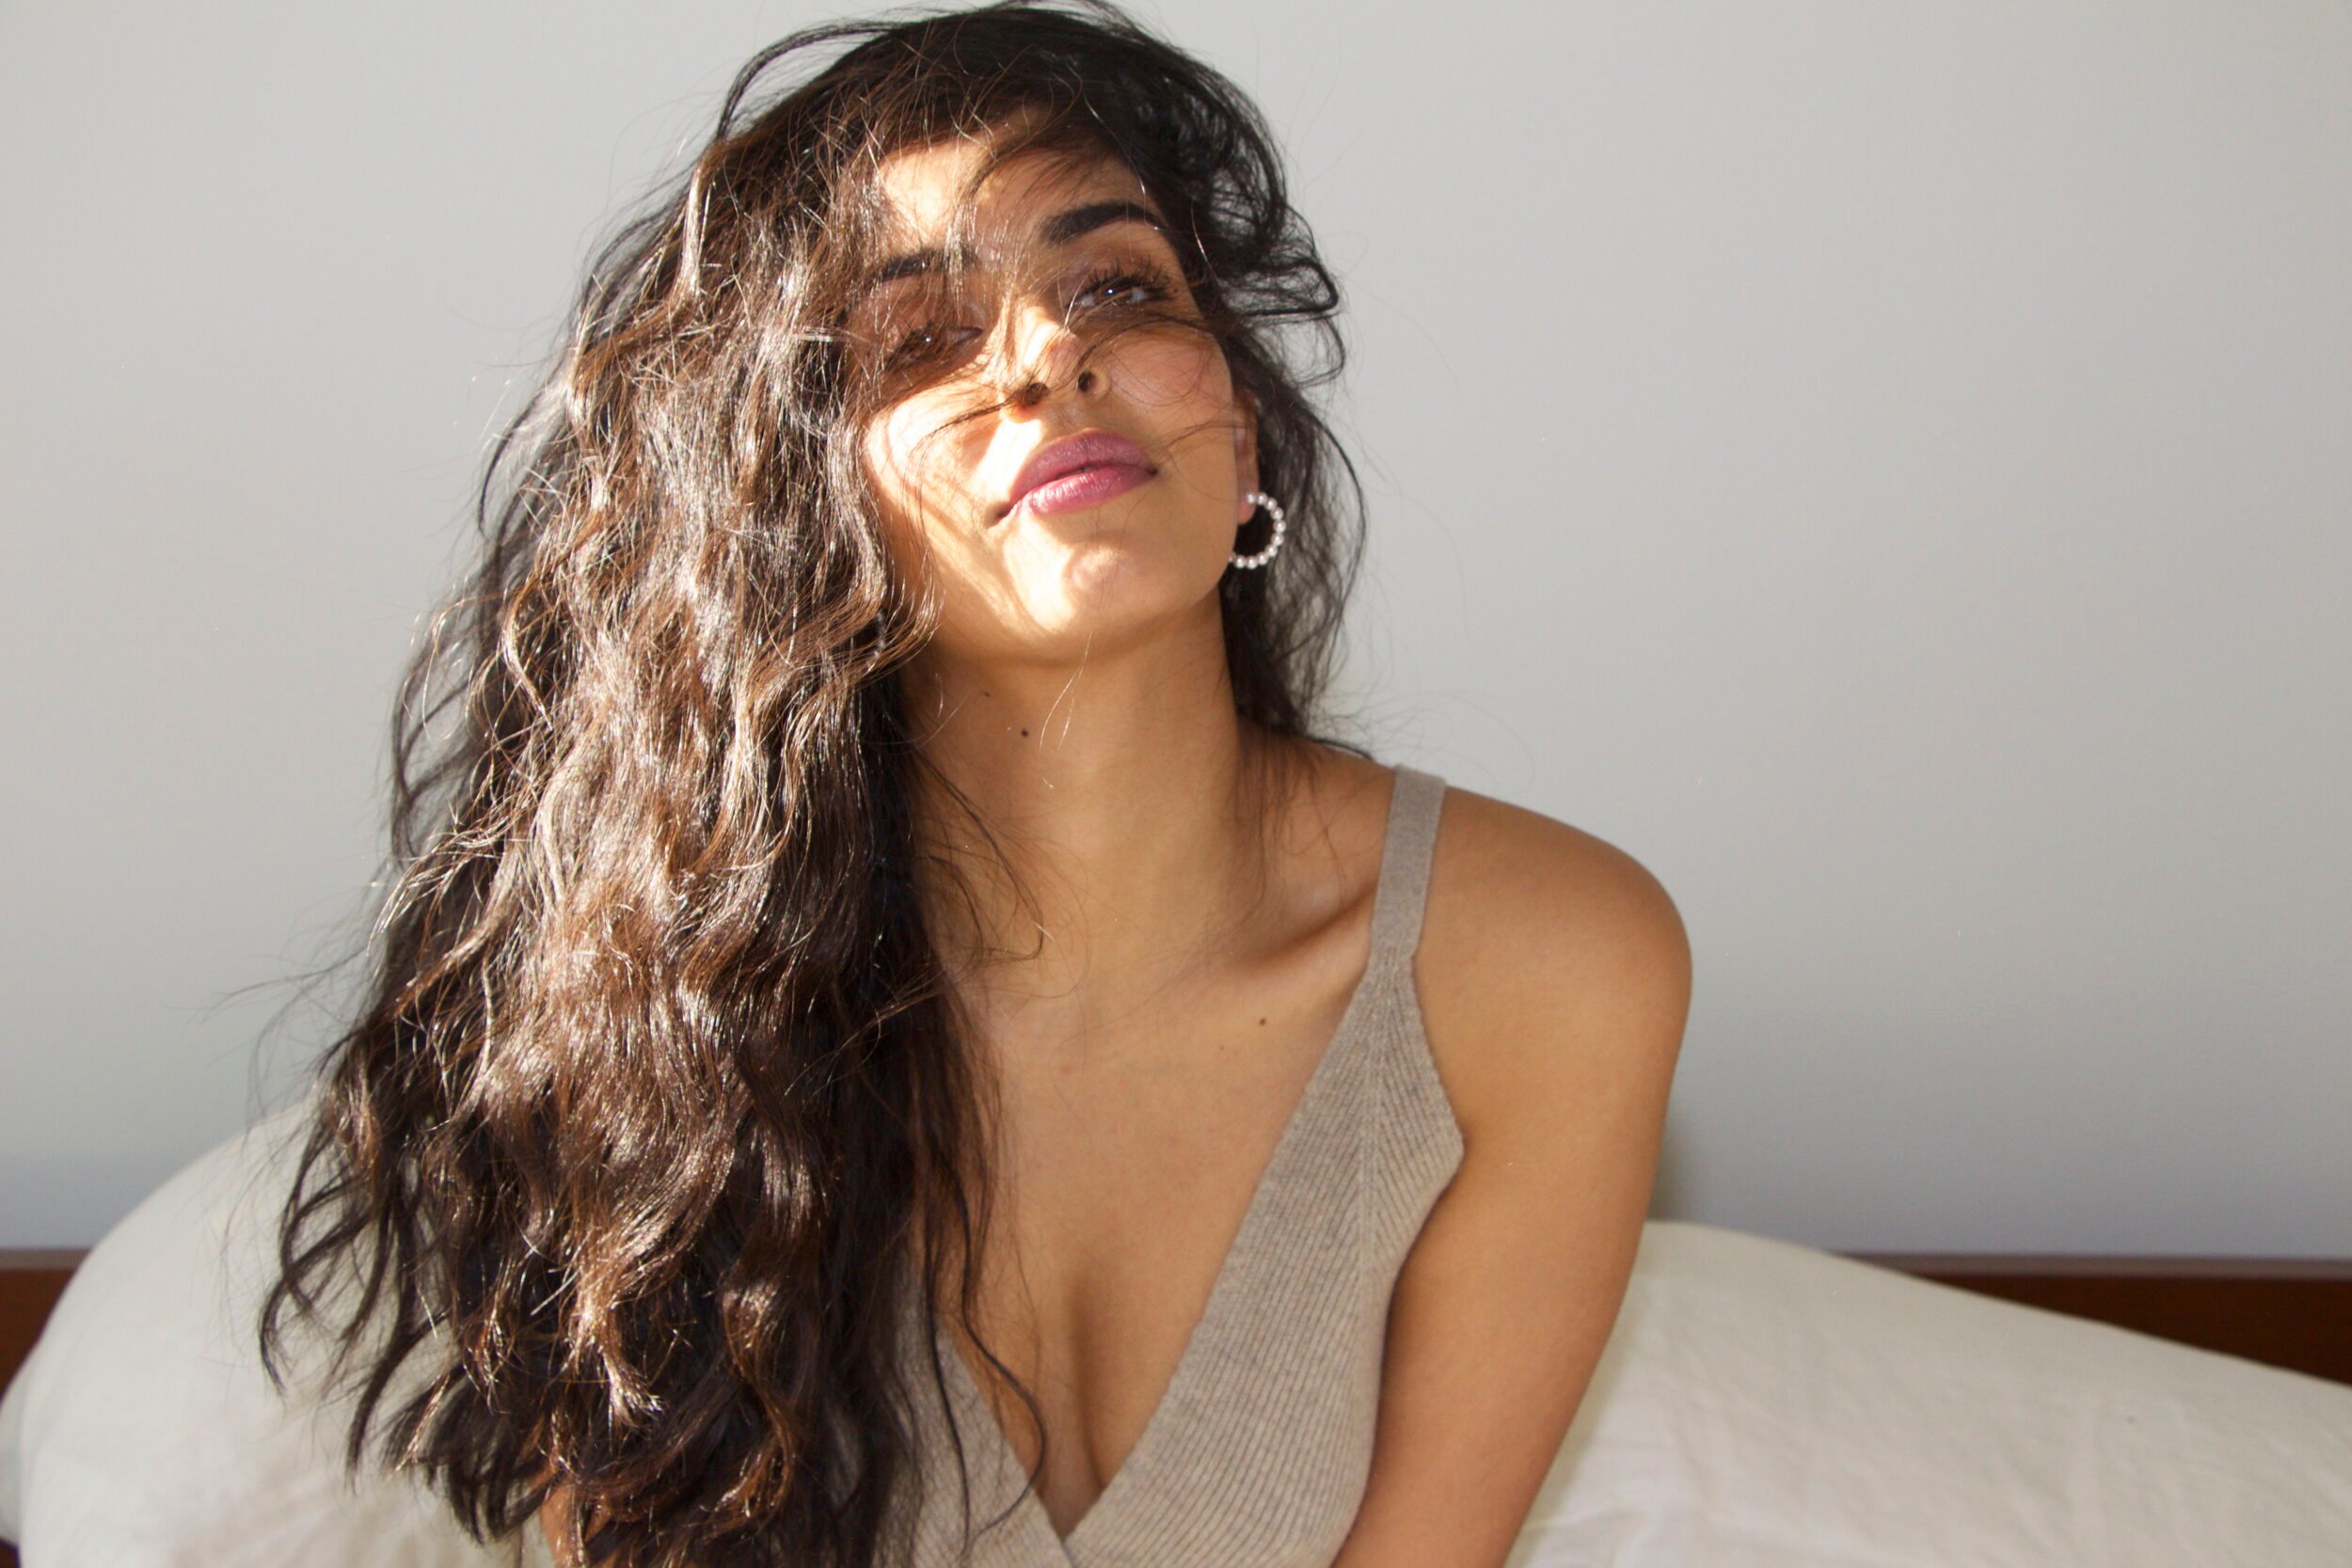 Parveen Kaur chats Manifest, pizza, and skincare with The Bare Magazine.